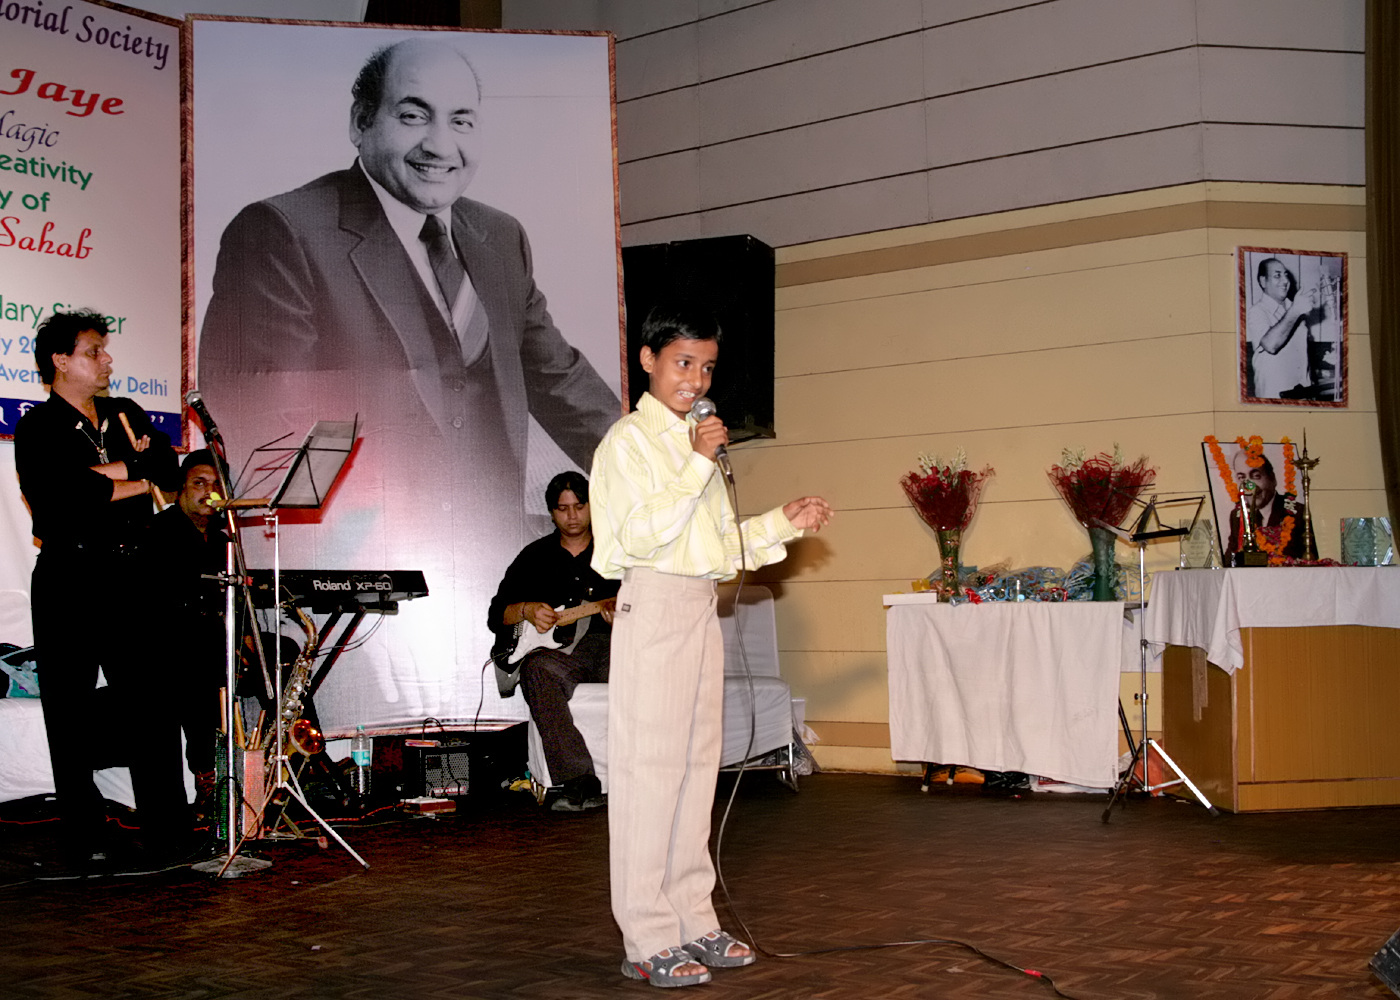 19(300708)-A young artist performing Rafi Sahab�s song